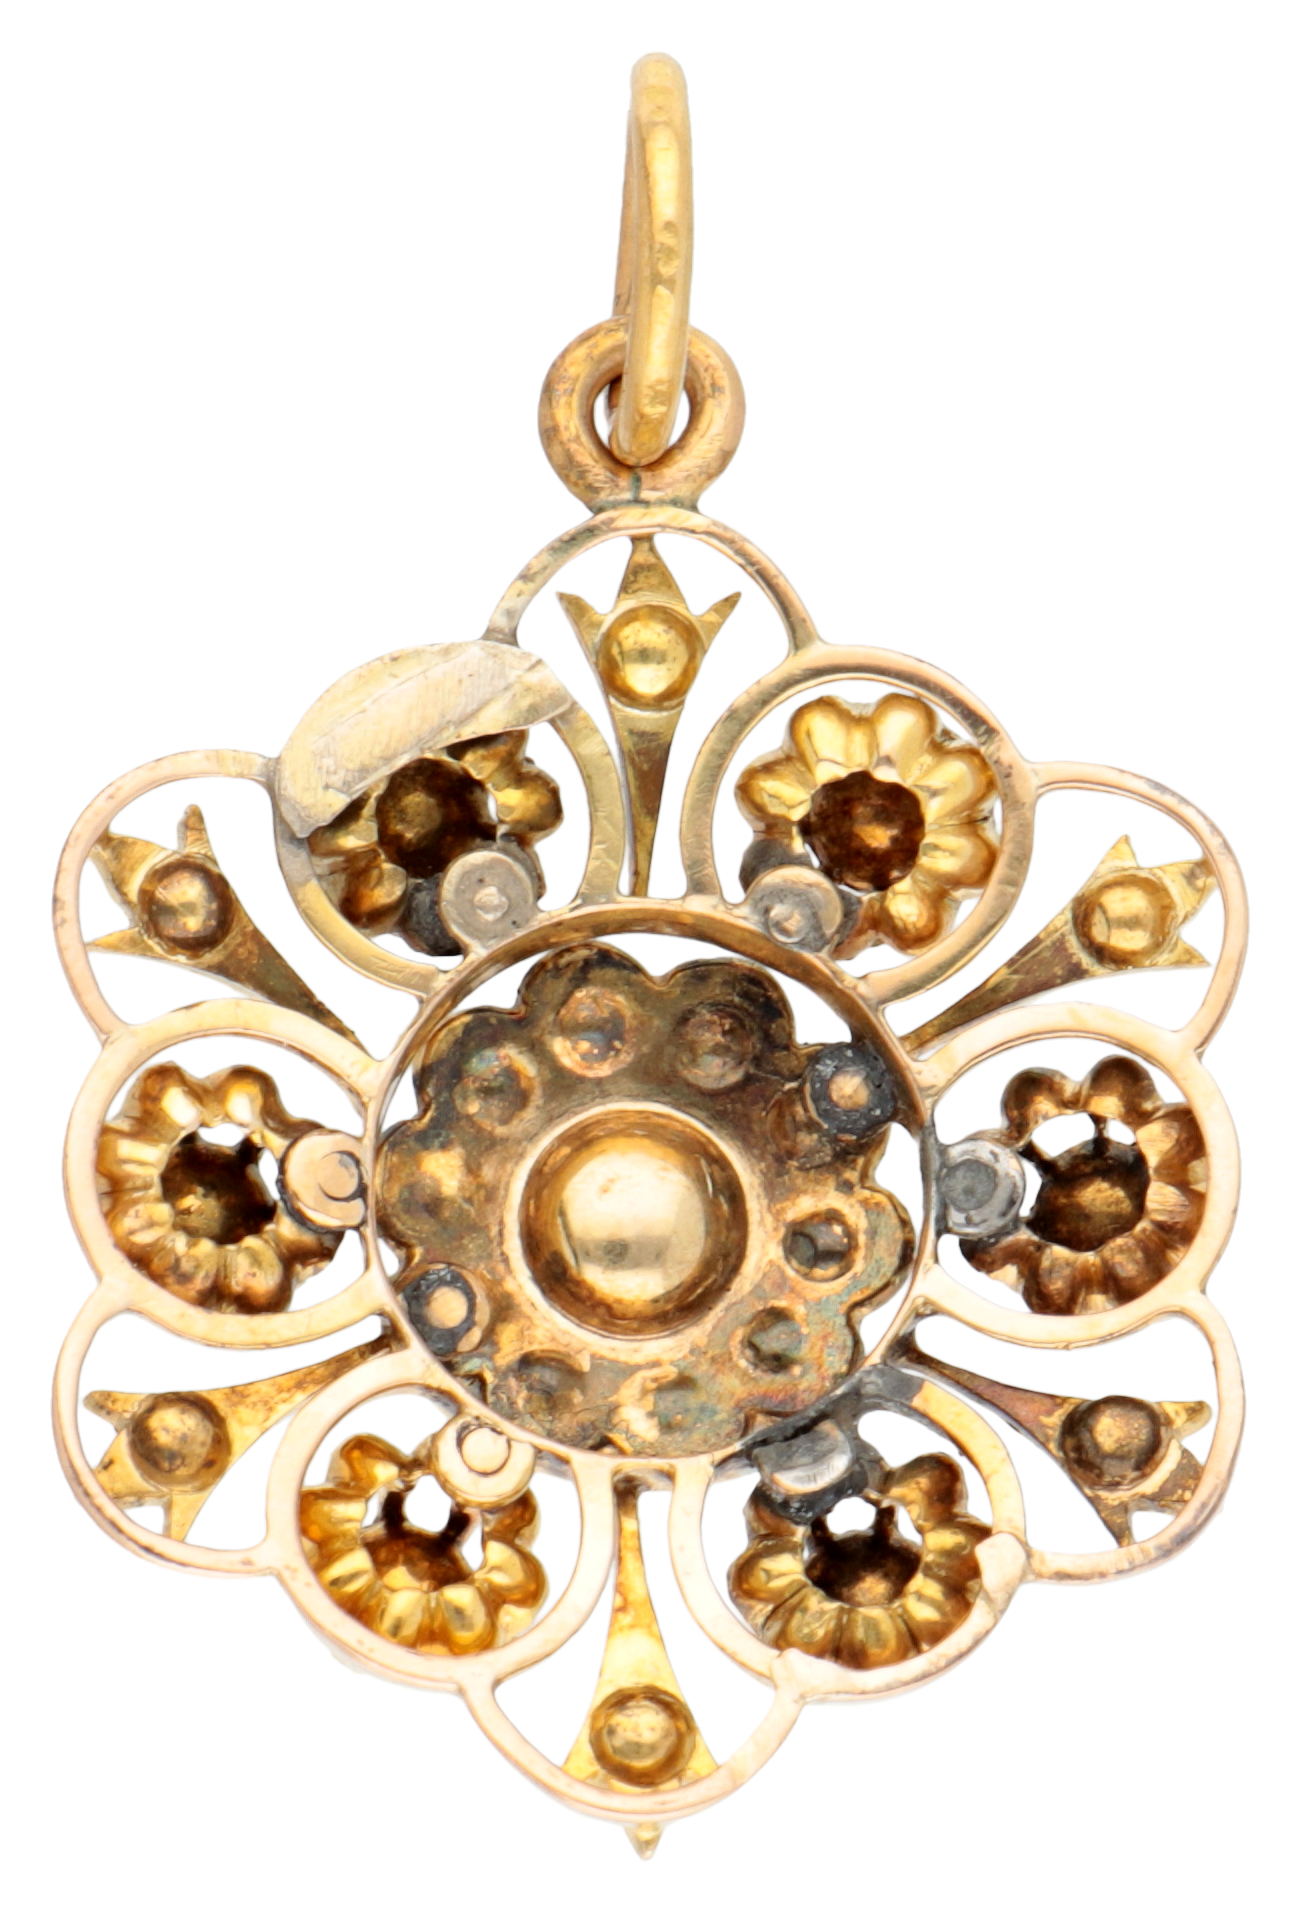 10K Yellow gold antique pendant with rose cut diamond on foil.  - Image 2 of 2